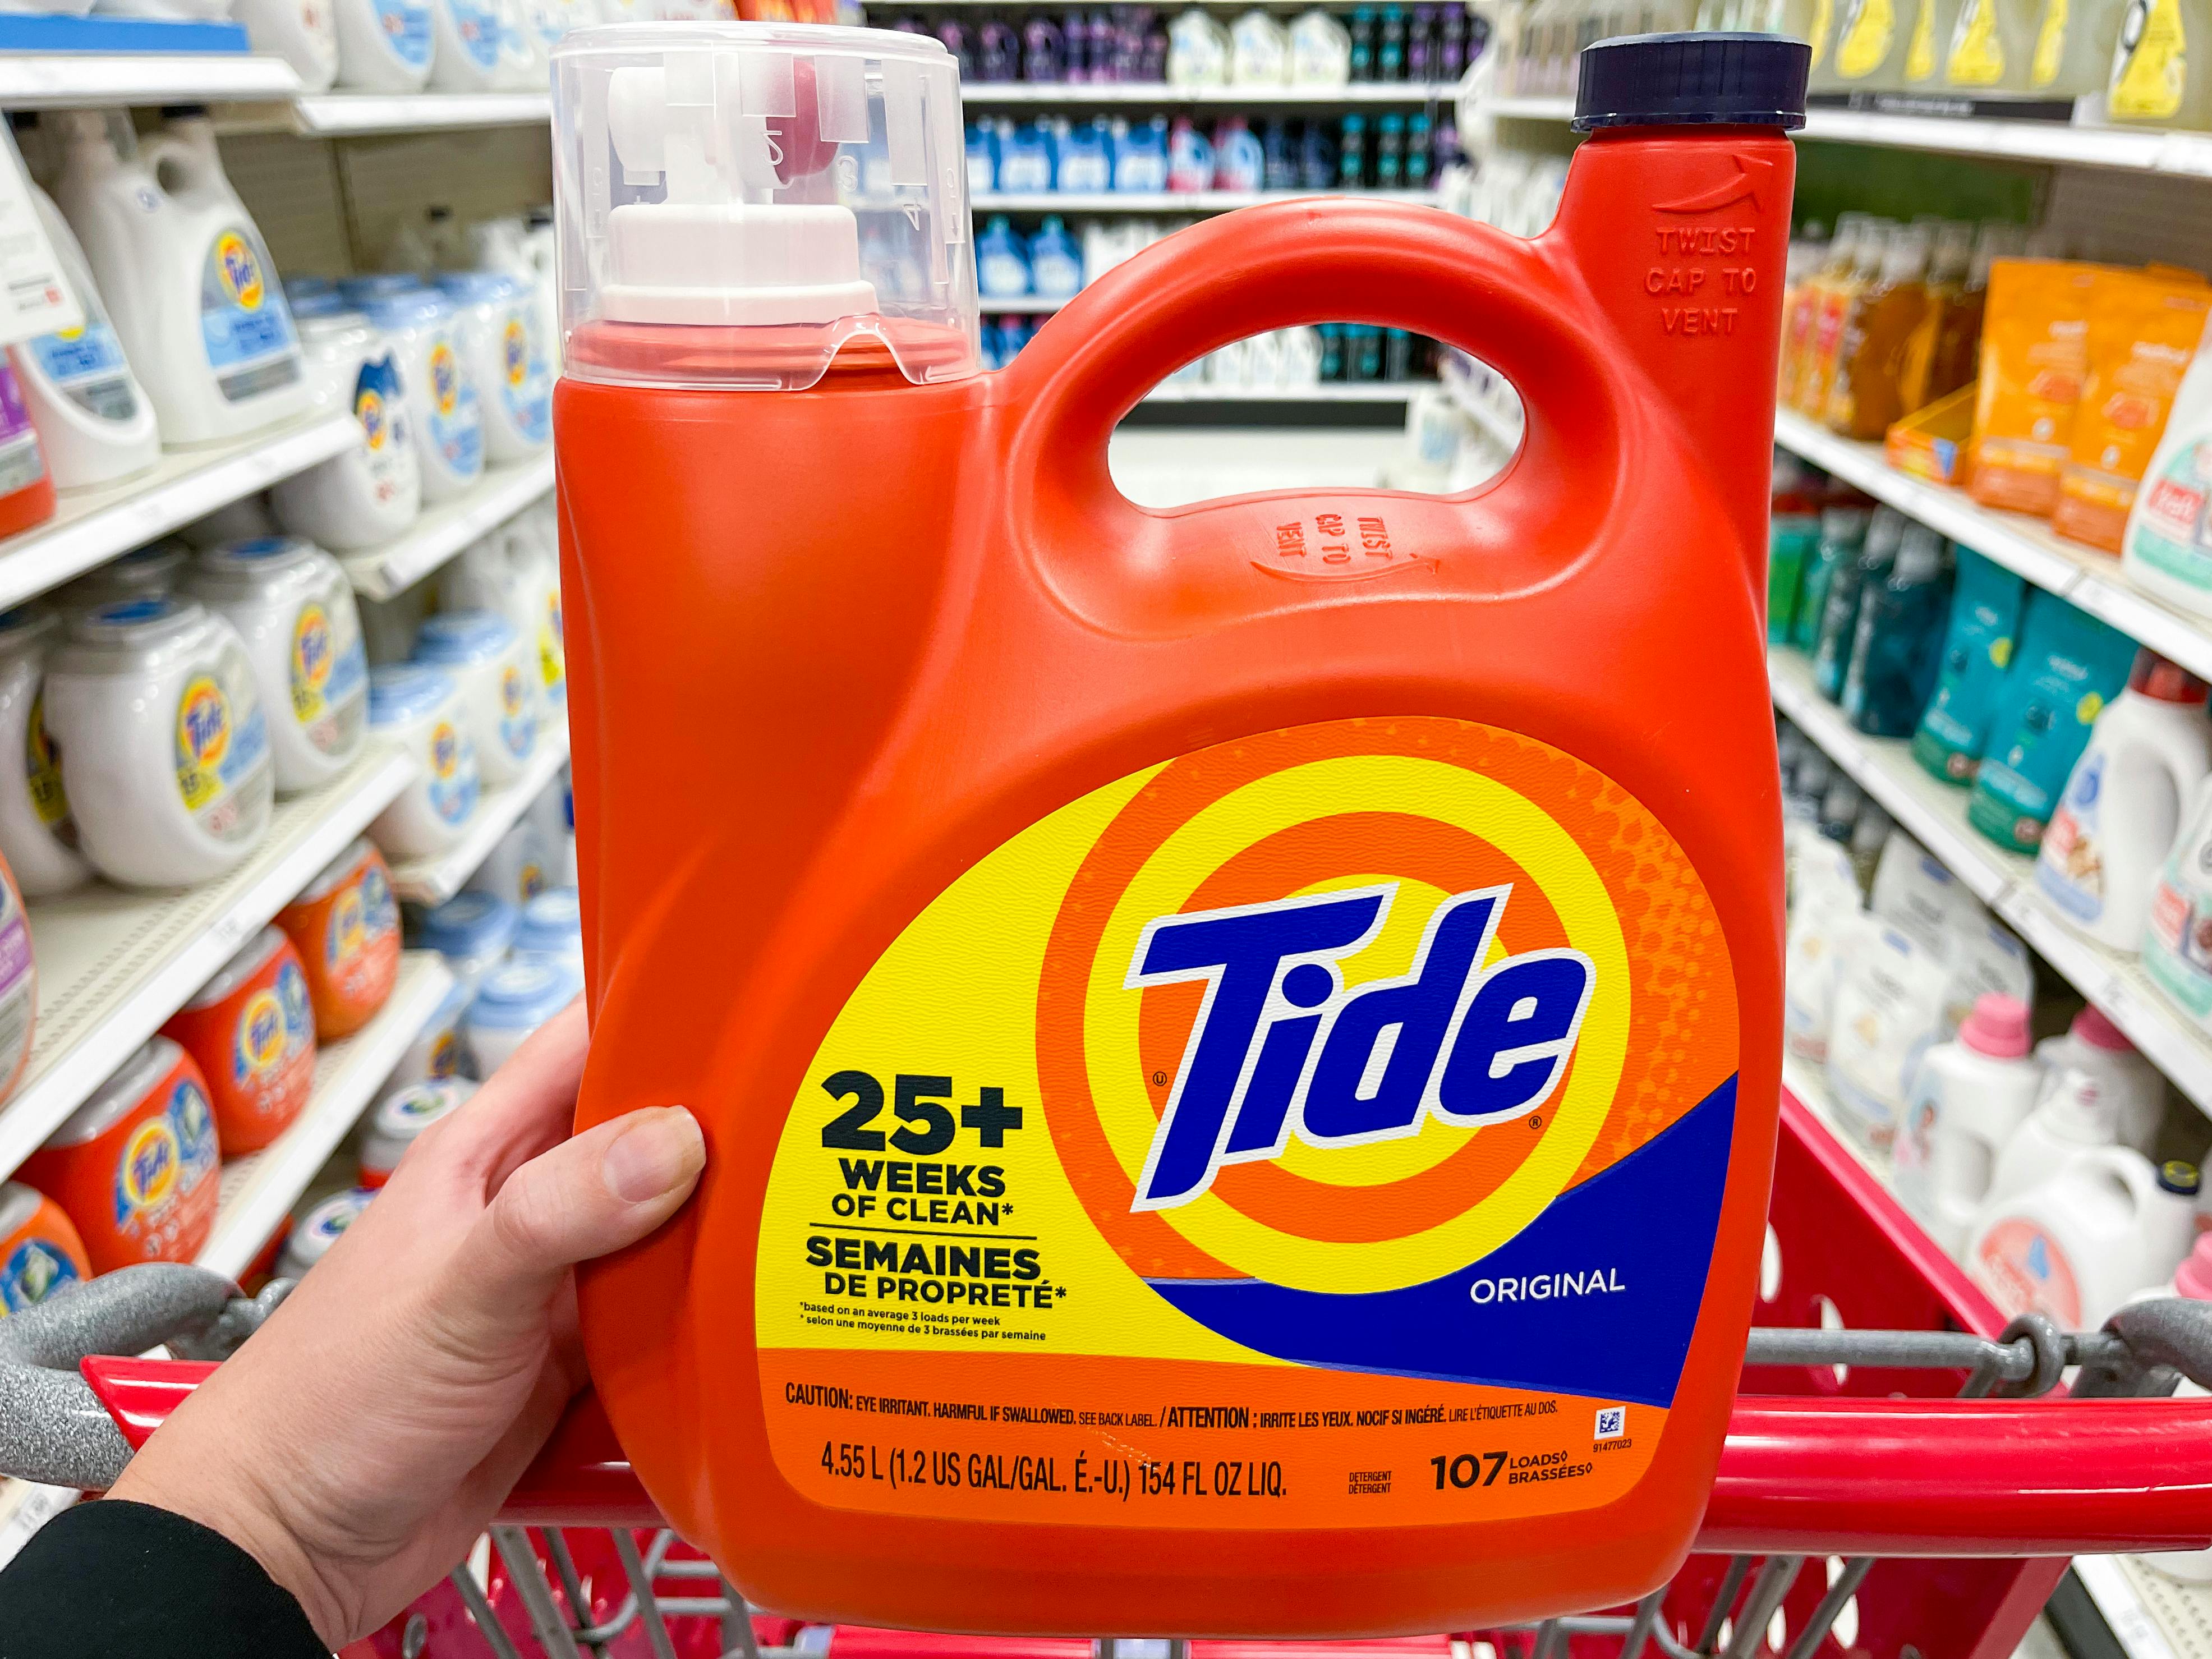 A person's hand resting on the handle of a Target shopping cart holding up a 1.2 gallon container of Tide Original laundry detergent.